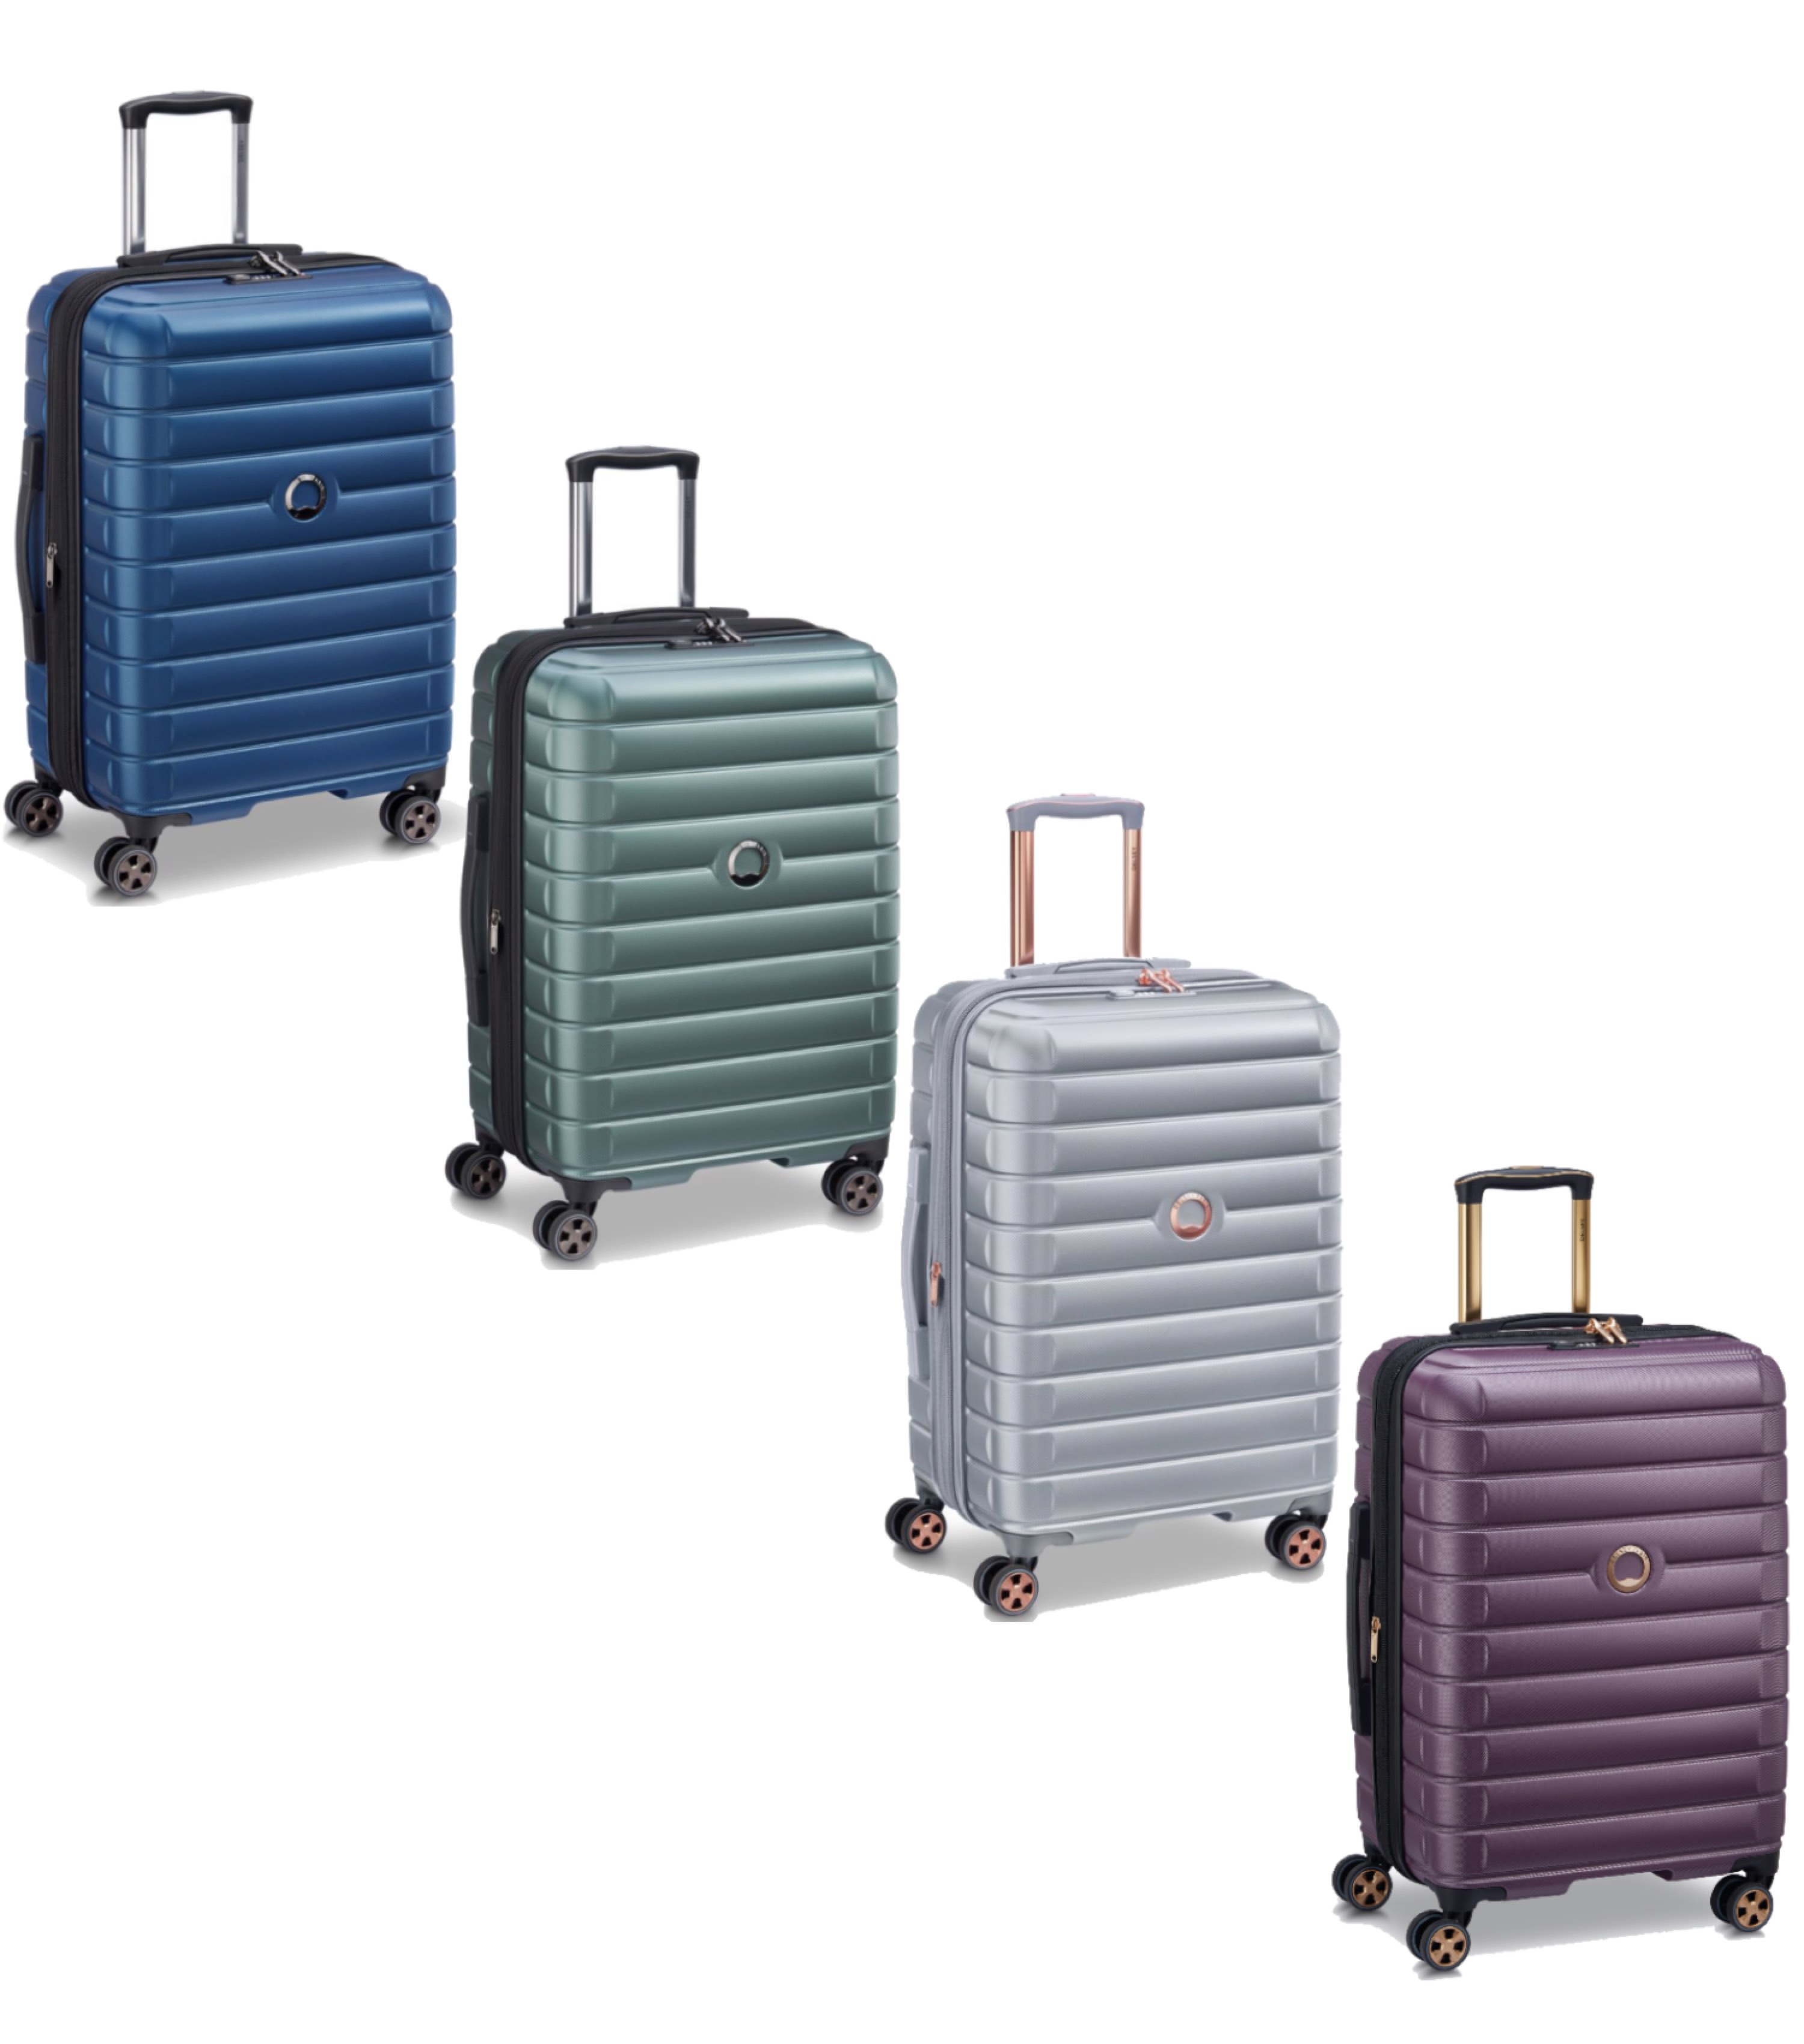 Delsey Shadow 5.0 - 66 cm Expandable Trolley Case by Delsey Travel Gear ...